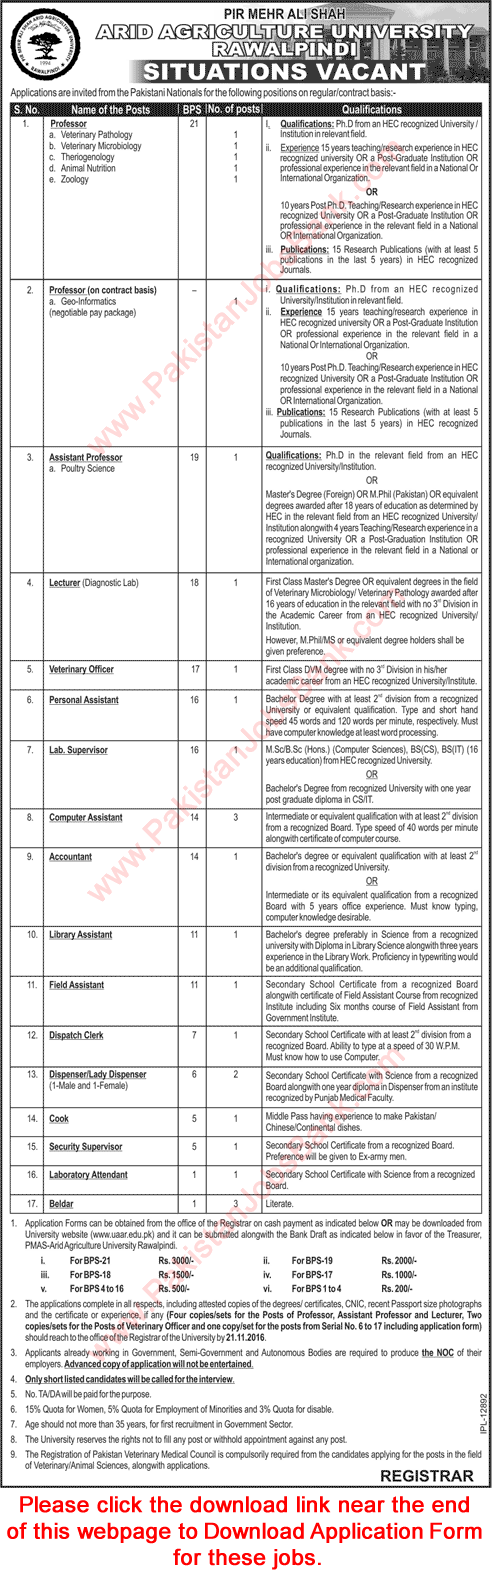 Arid Agriculture University Rawalpindi Jobs October 2016 November Application Form Teaching Faculty & Others Latest